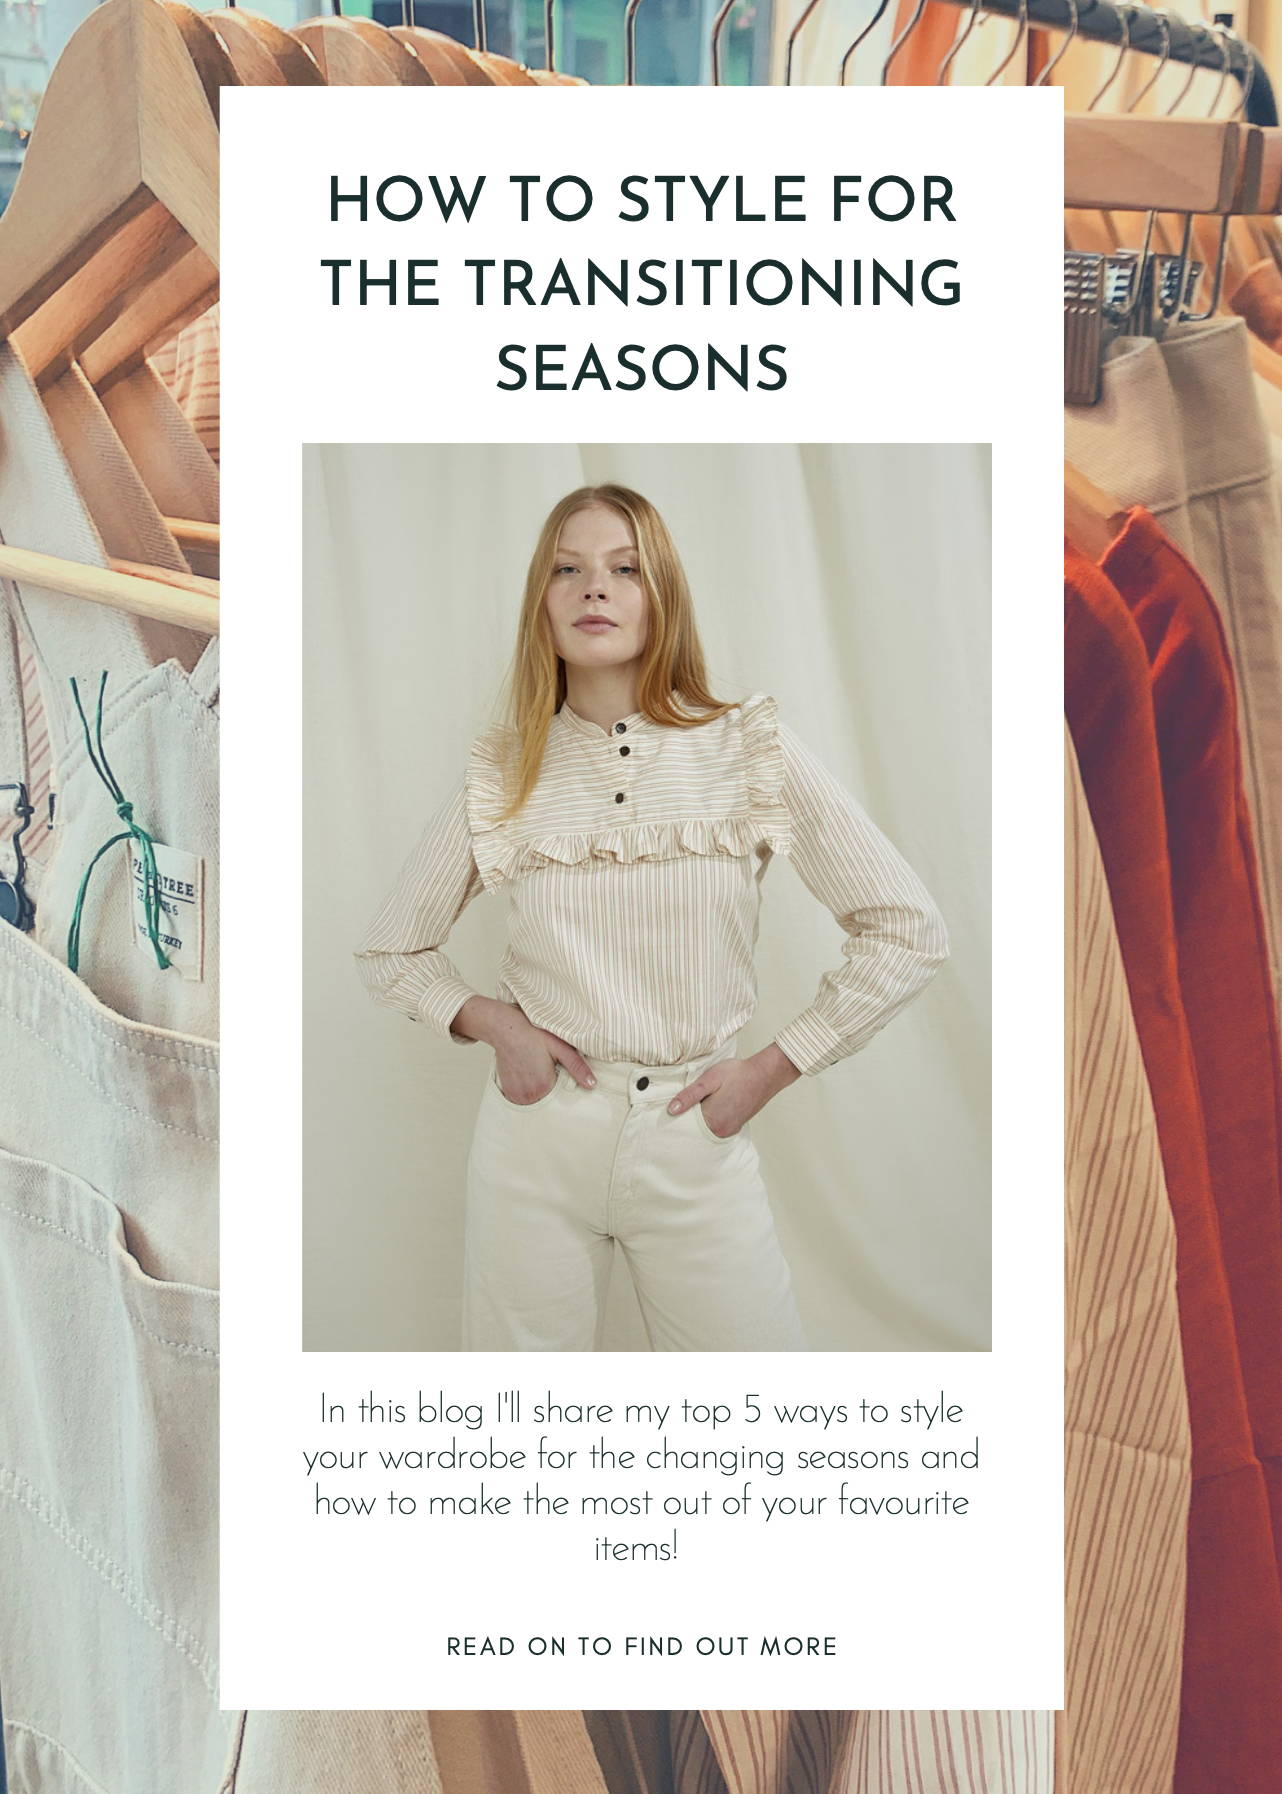 How to Style for the Transitioning Seasons